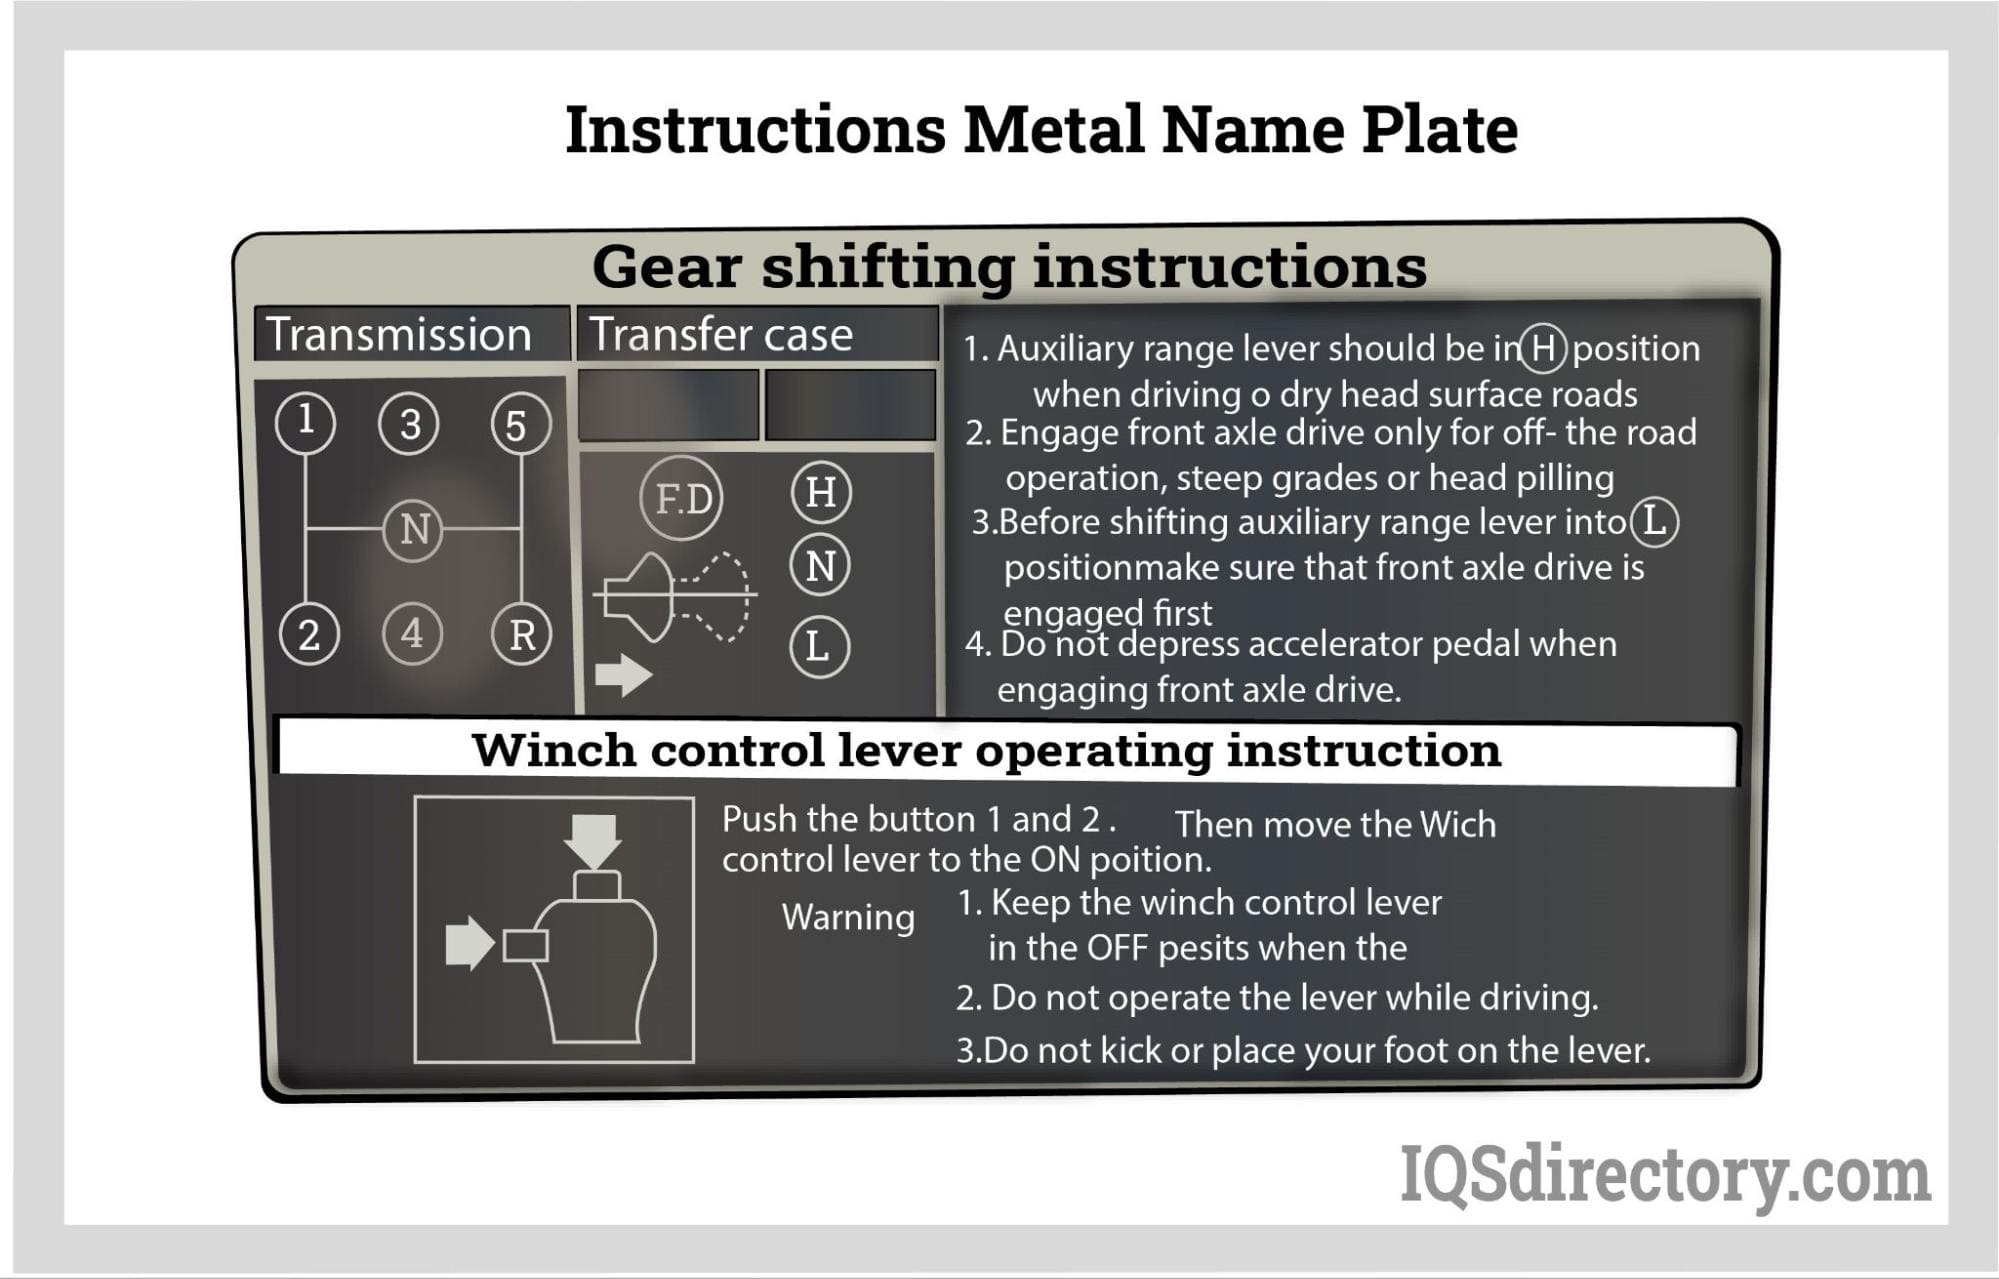 Instructions Metal Name Plate